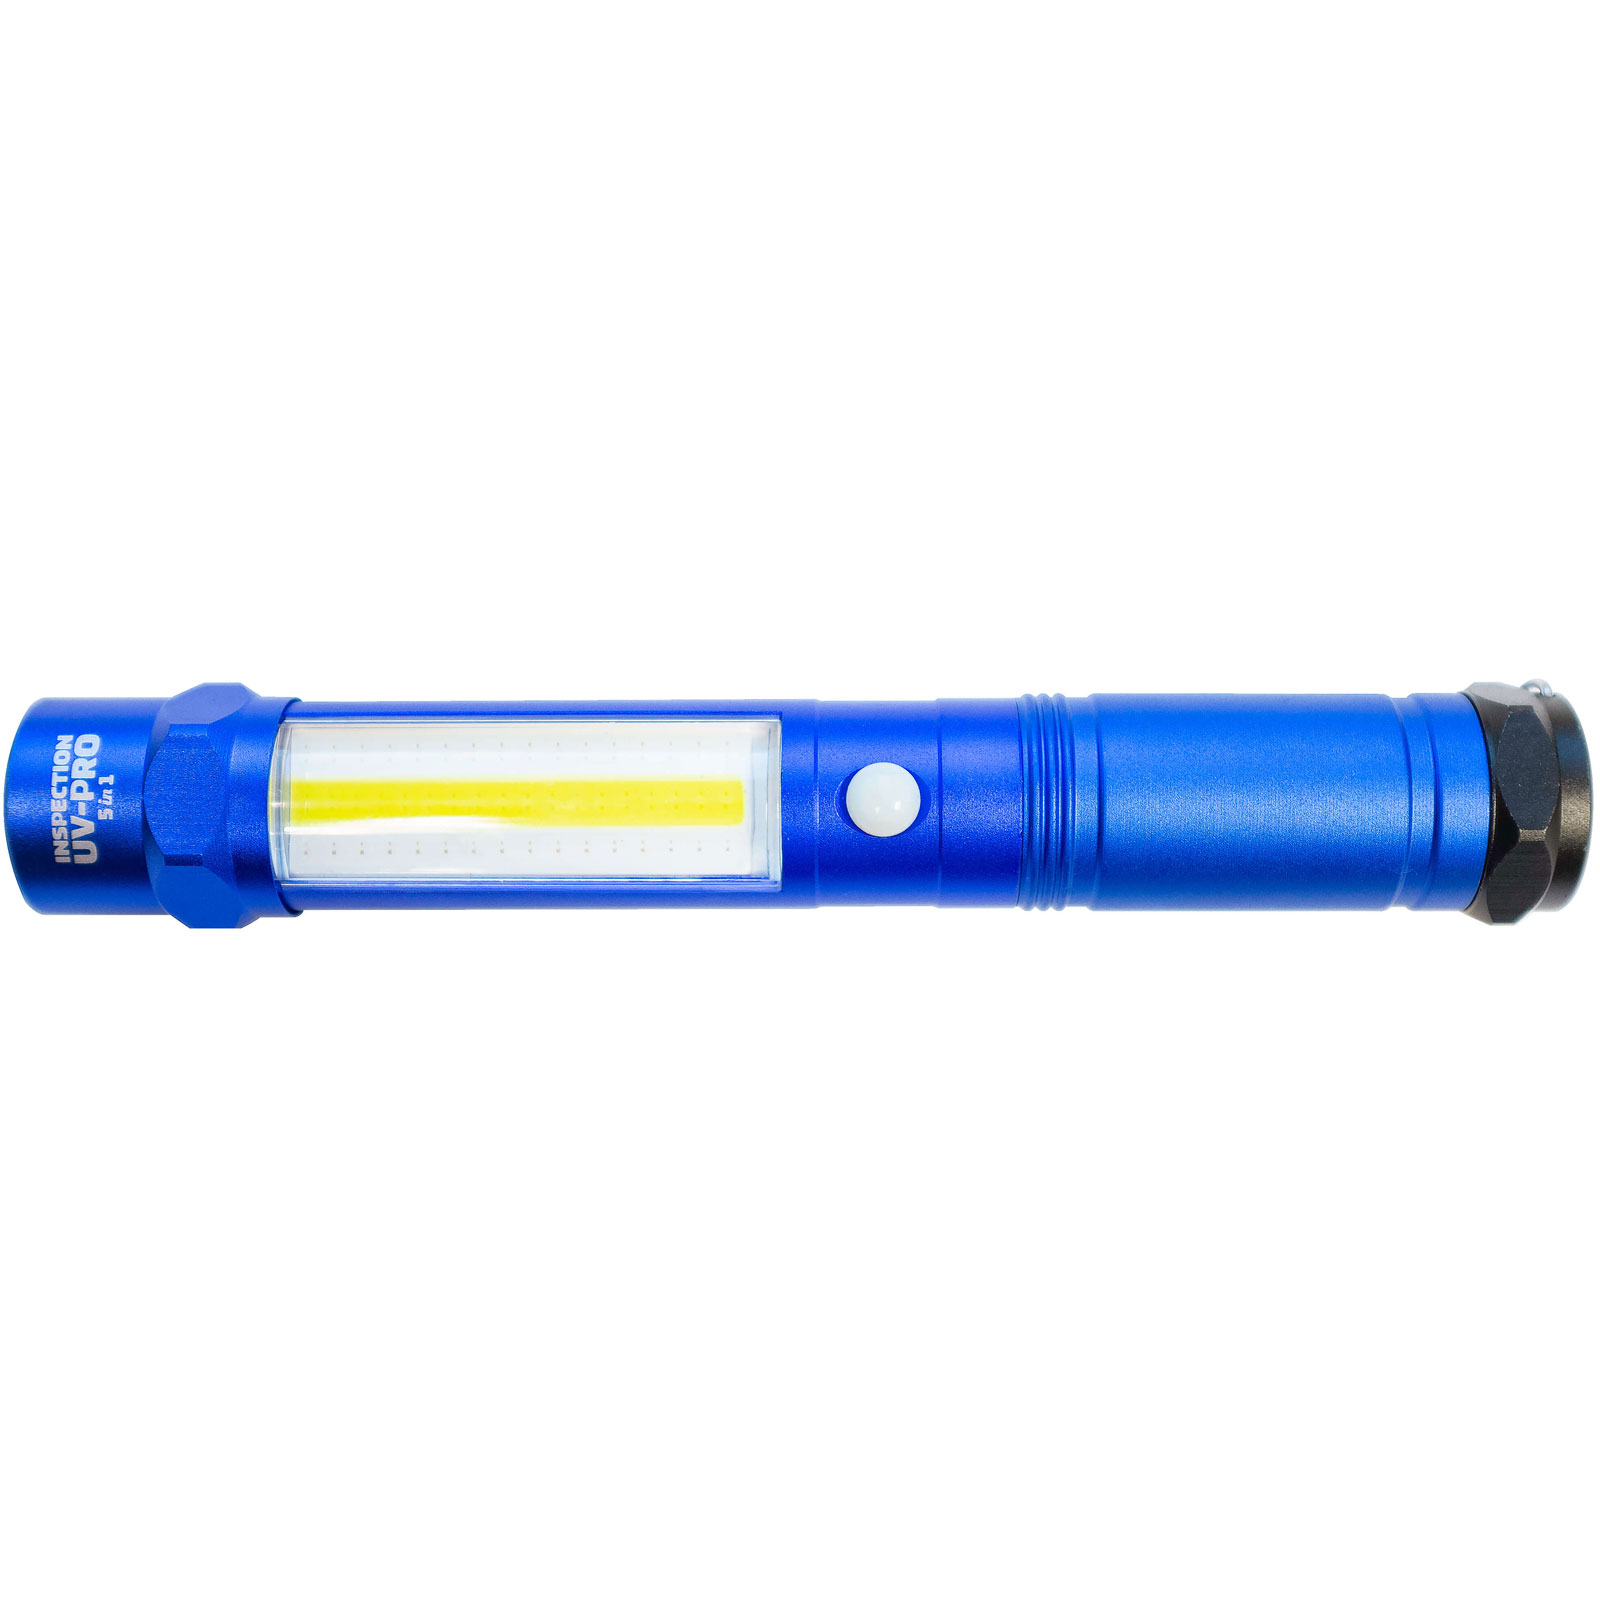 Side Front View of Ultimate Flashlight